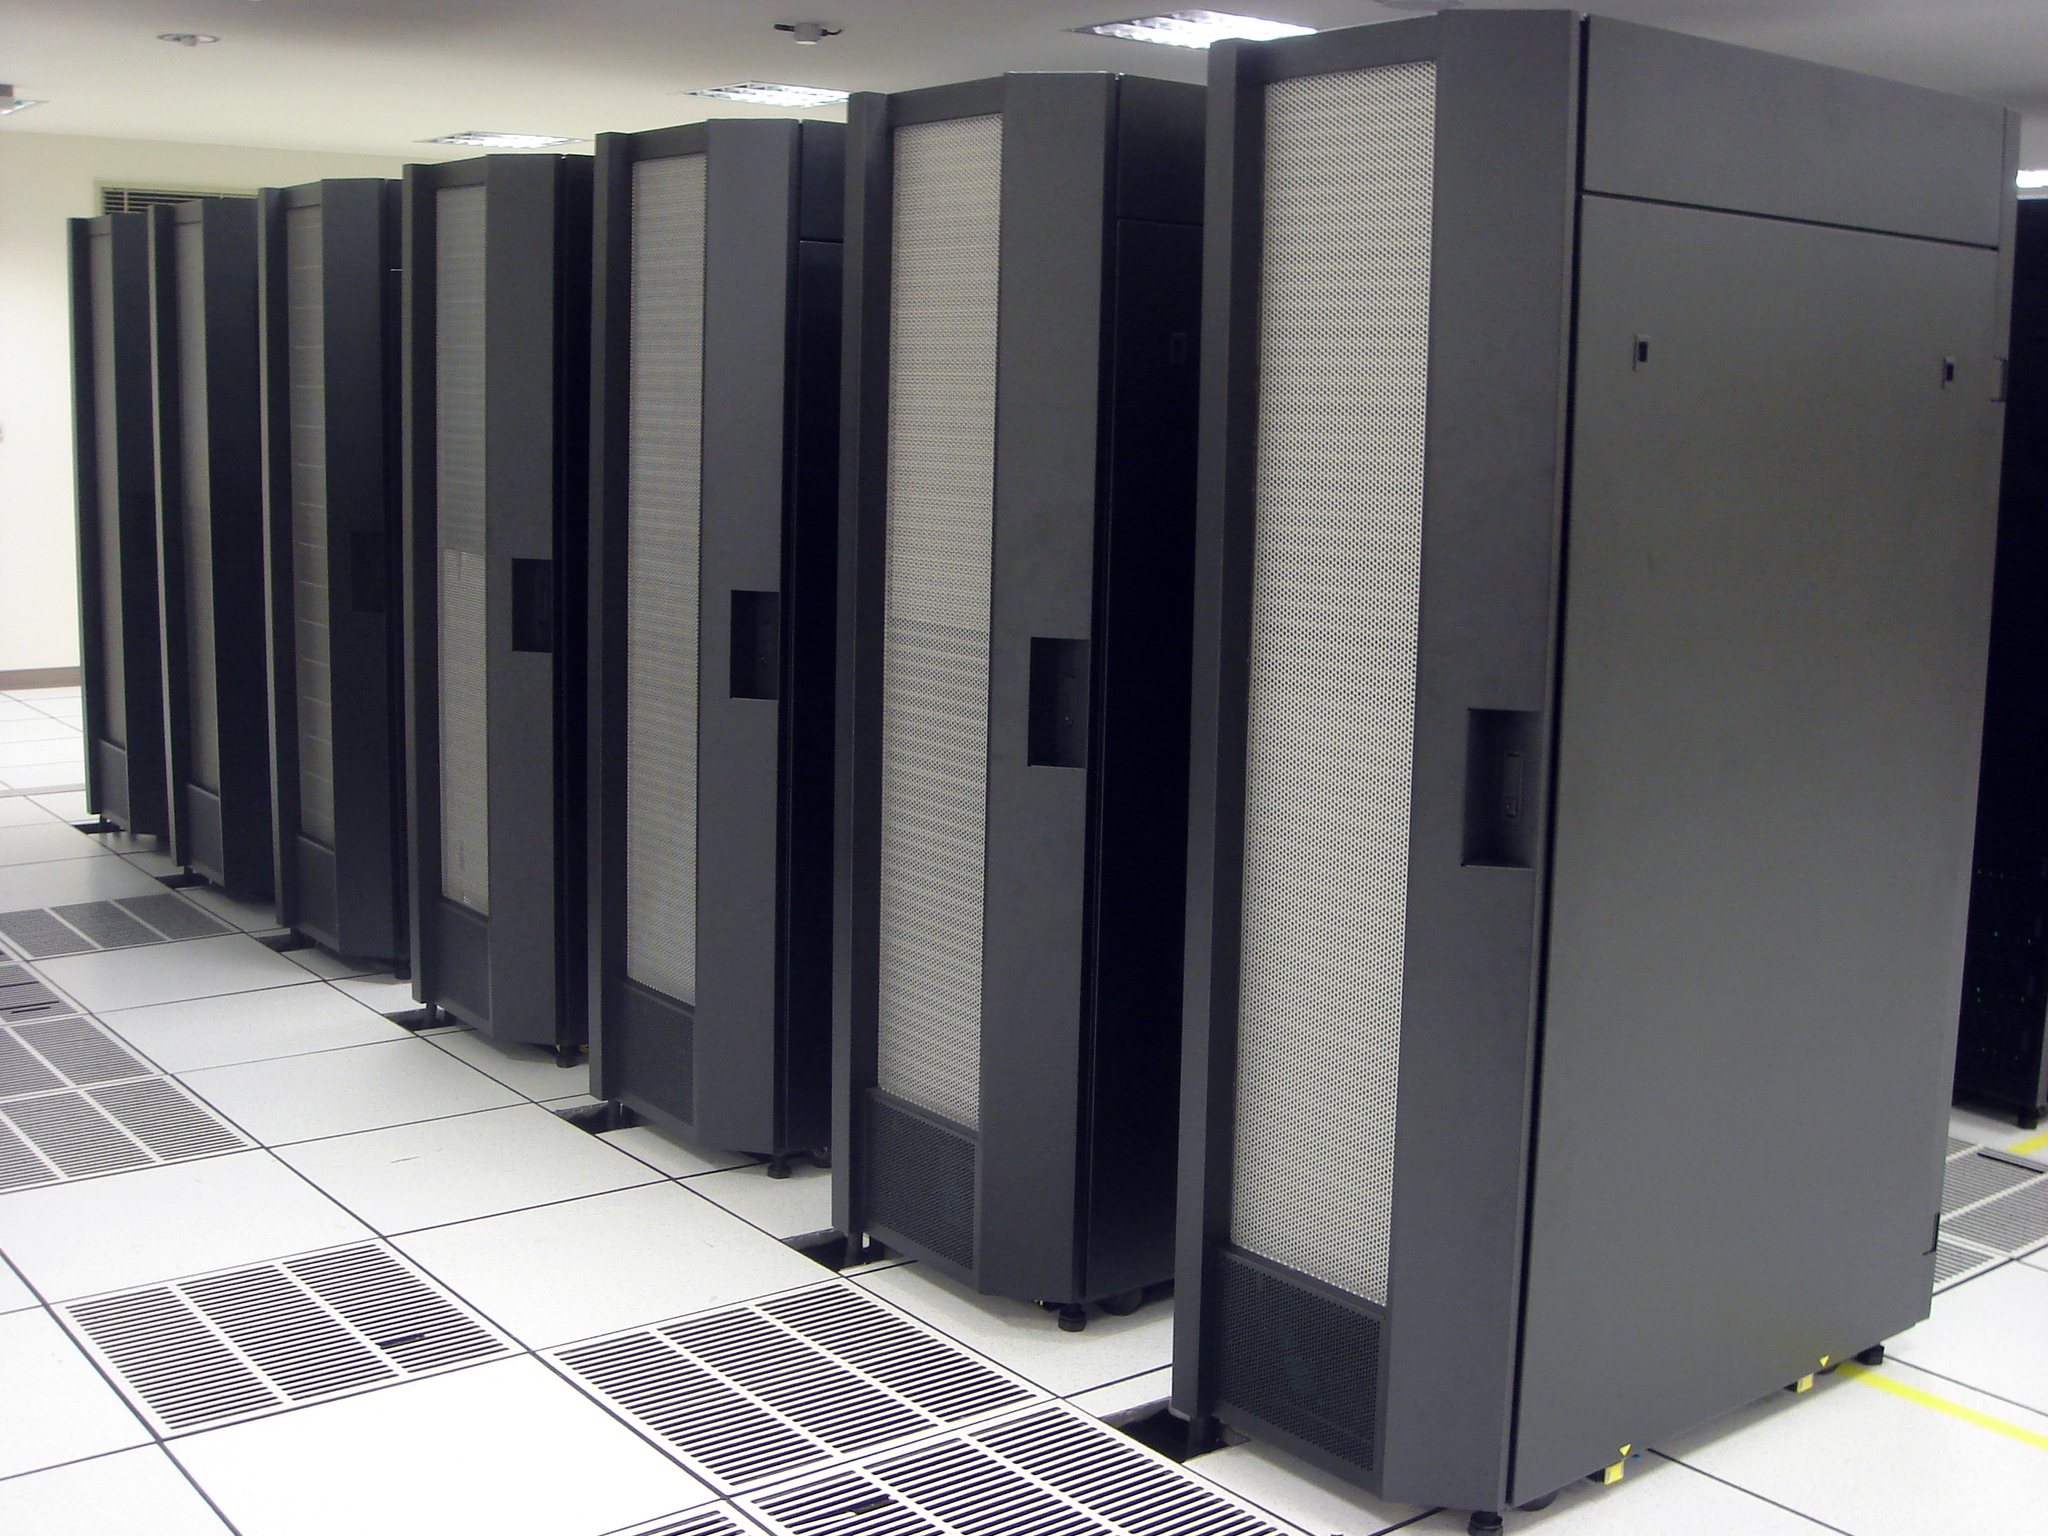 The next-generation supercomputing platform built by the NCHC